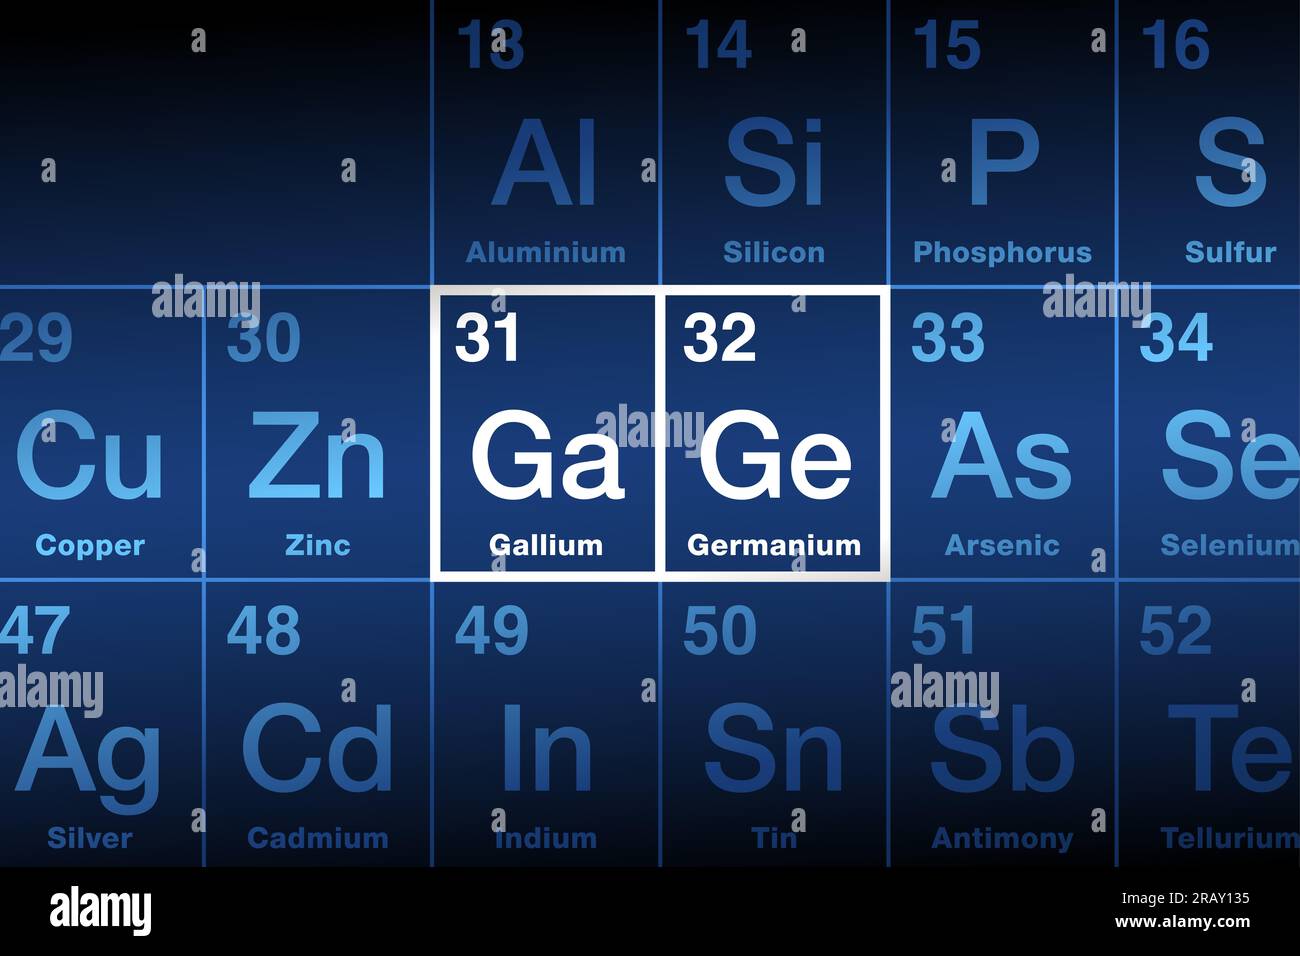 Gallium and Germanium on periodic table of elements. Gallium (Ga), a metal, Germanium (Ge), a metalloid. Rare and important semiconductor materials. Stock Photo